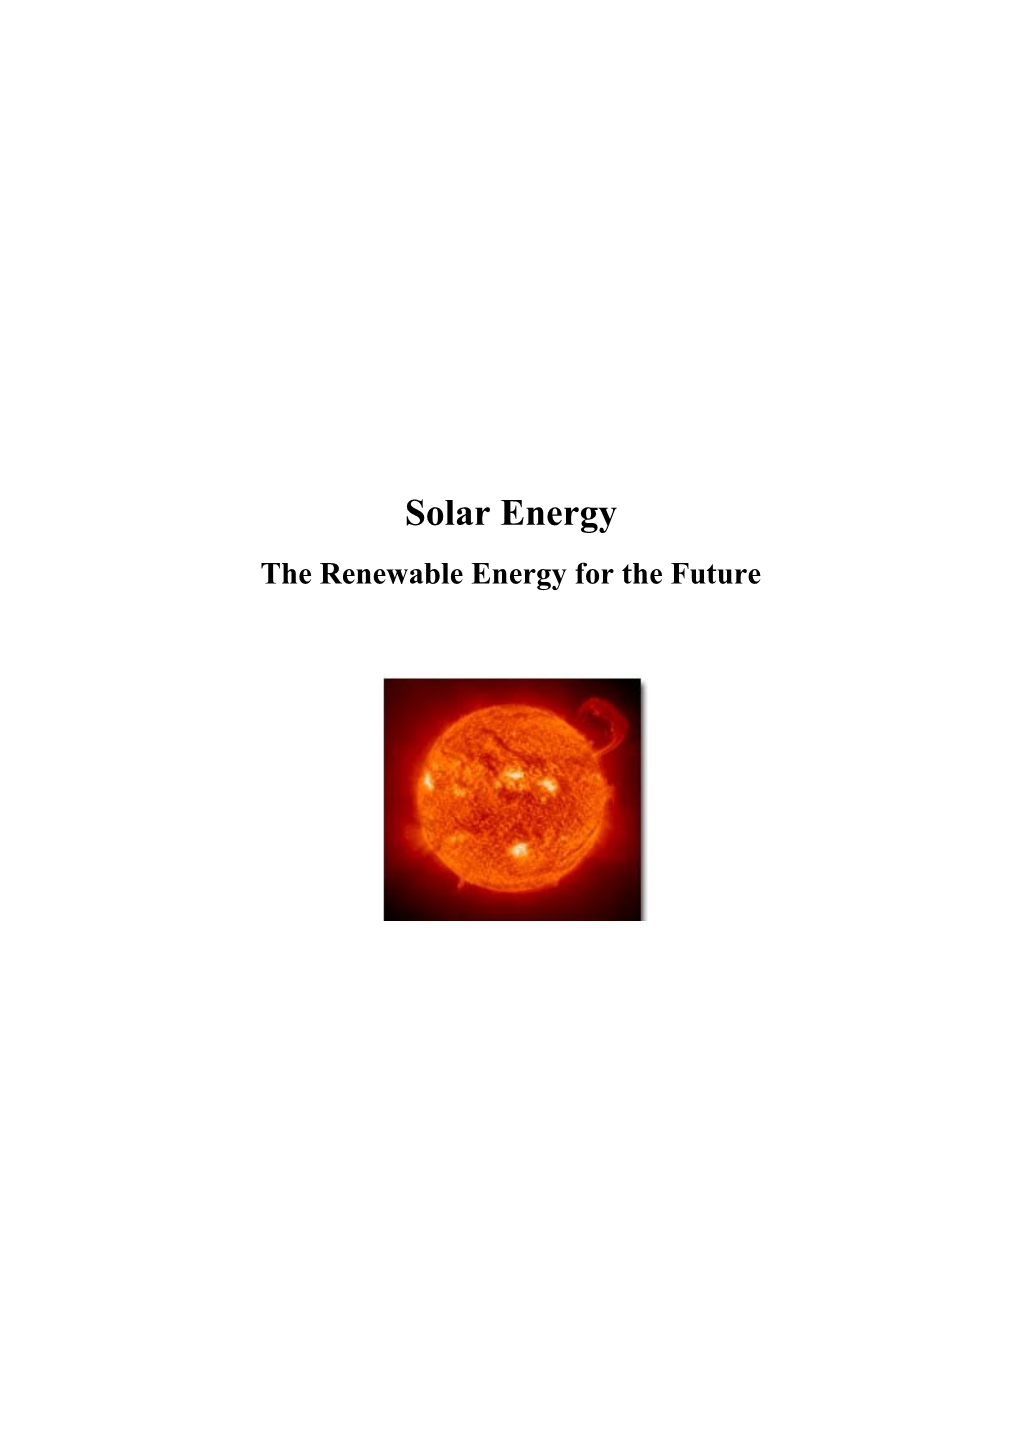 The Renewable Energy Forthe Future